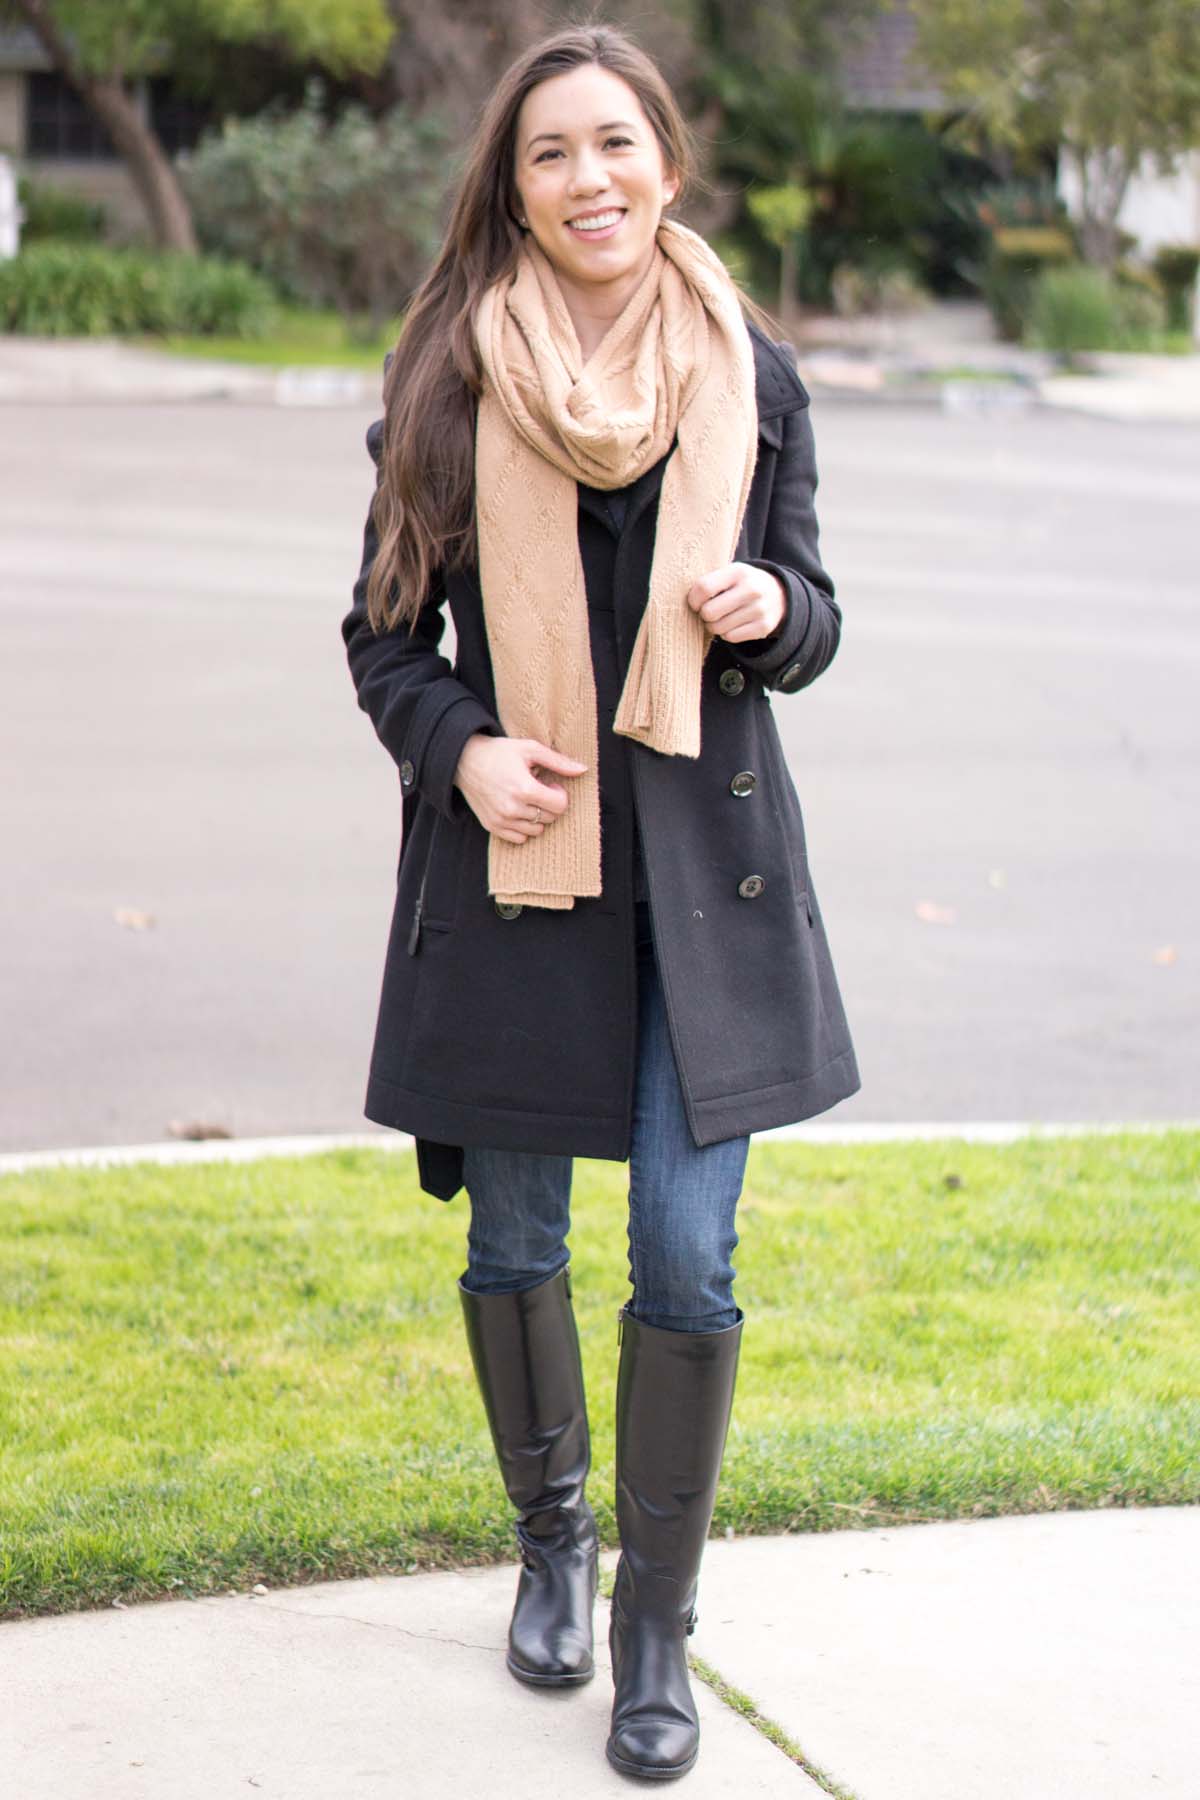 3 Must Have Boots for Fall - Petite 